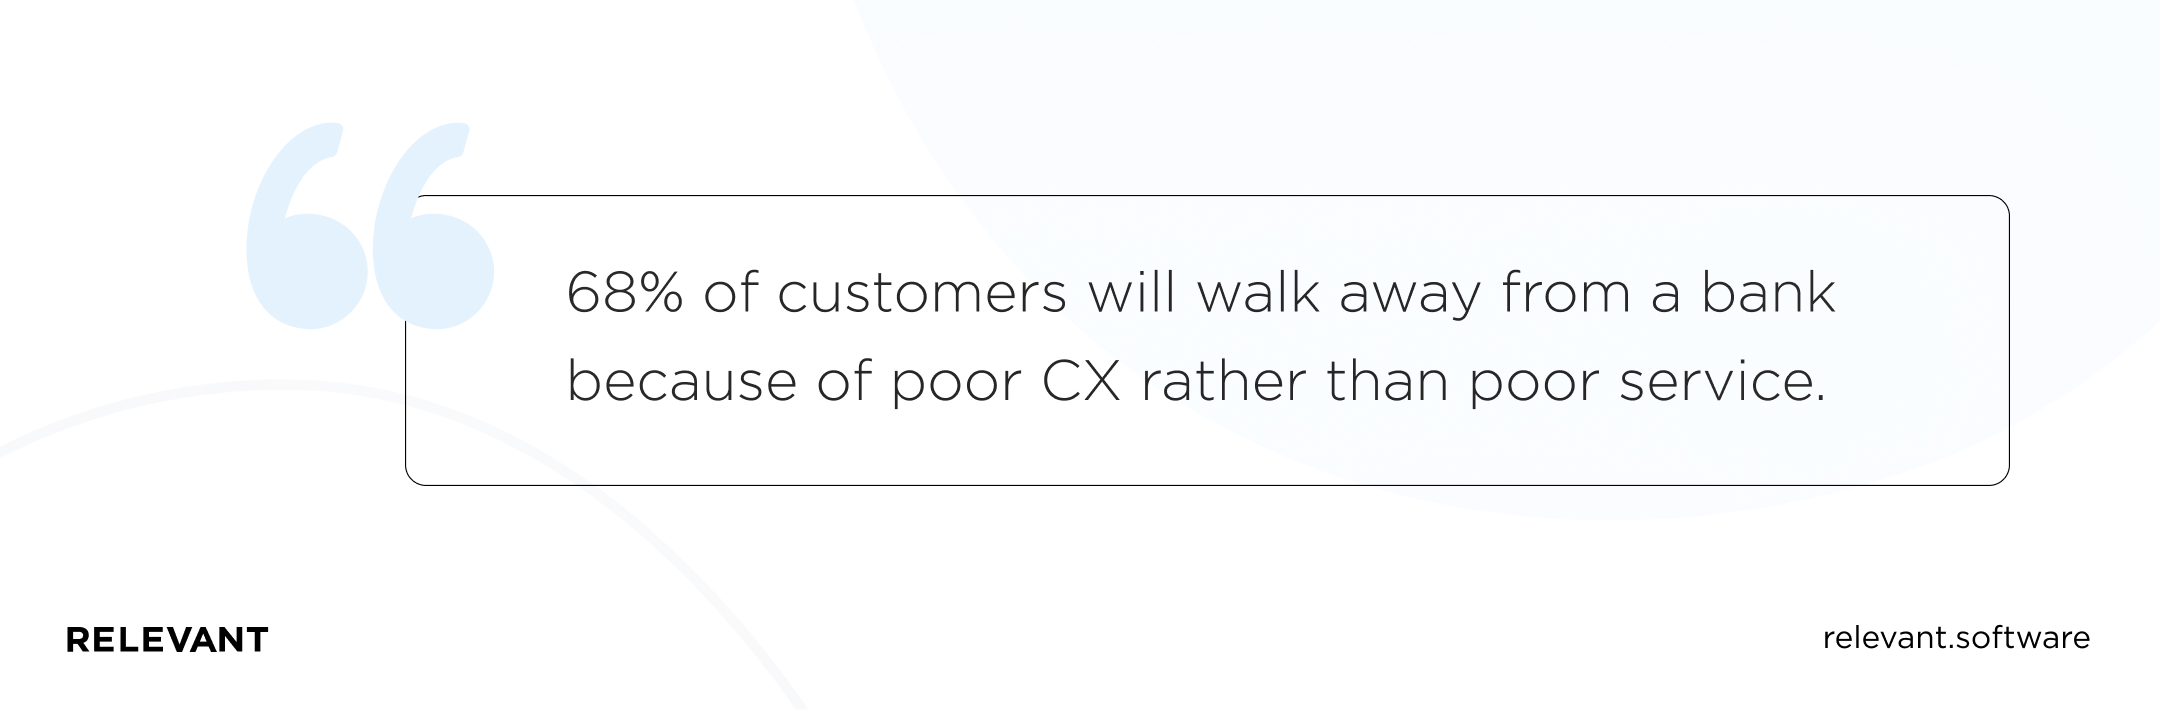 68% of customers will walk away from a bank because of poor customer experience